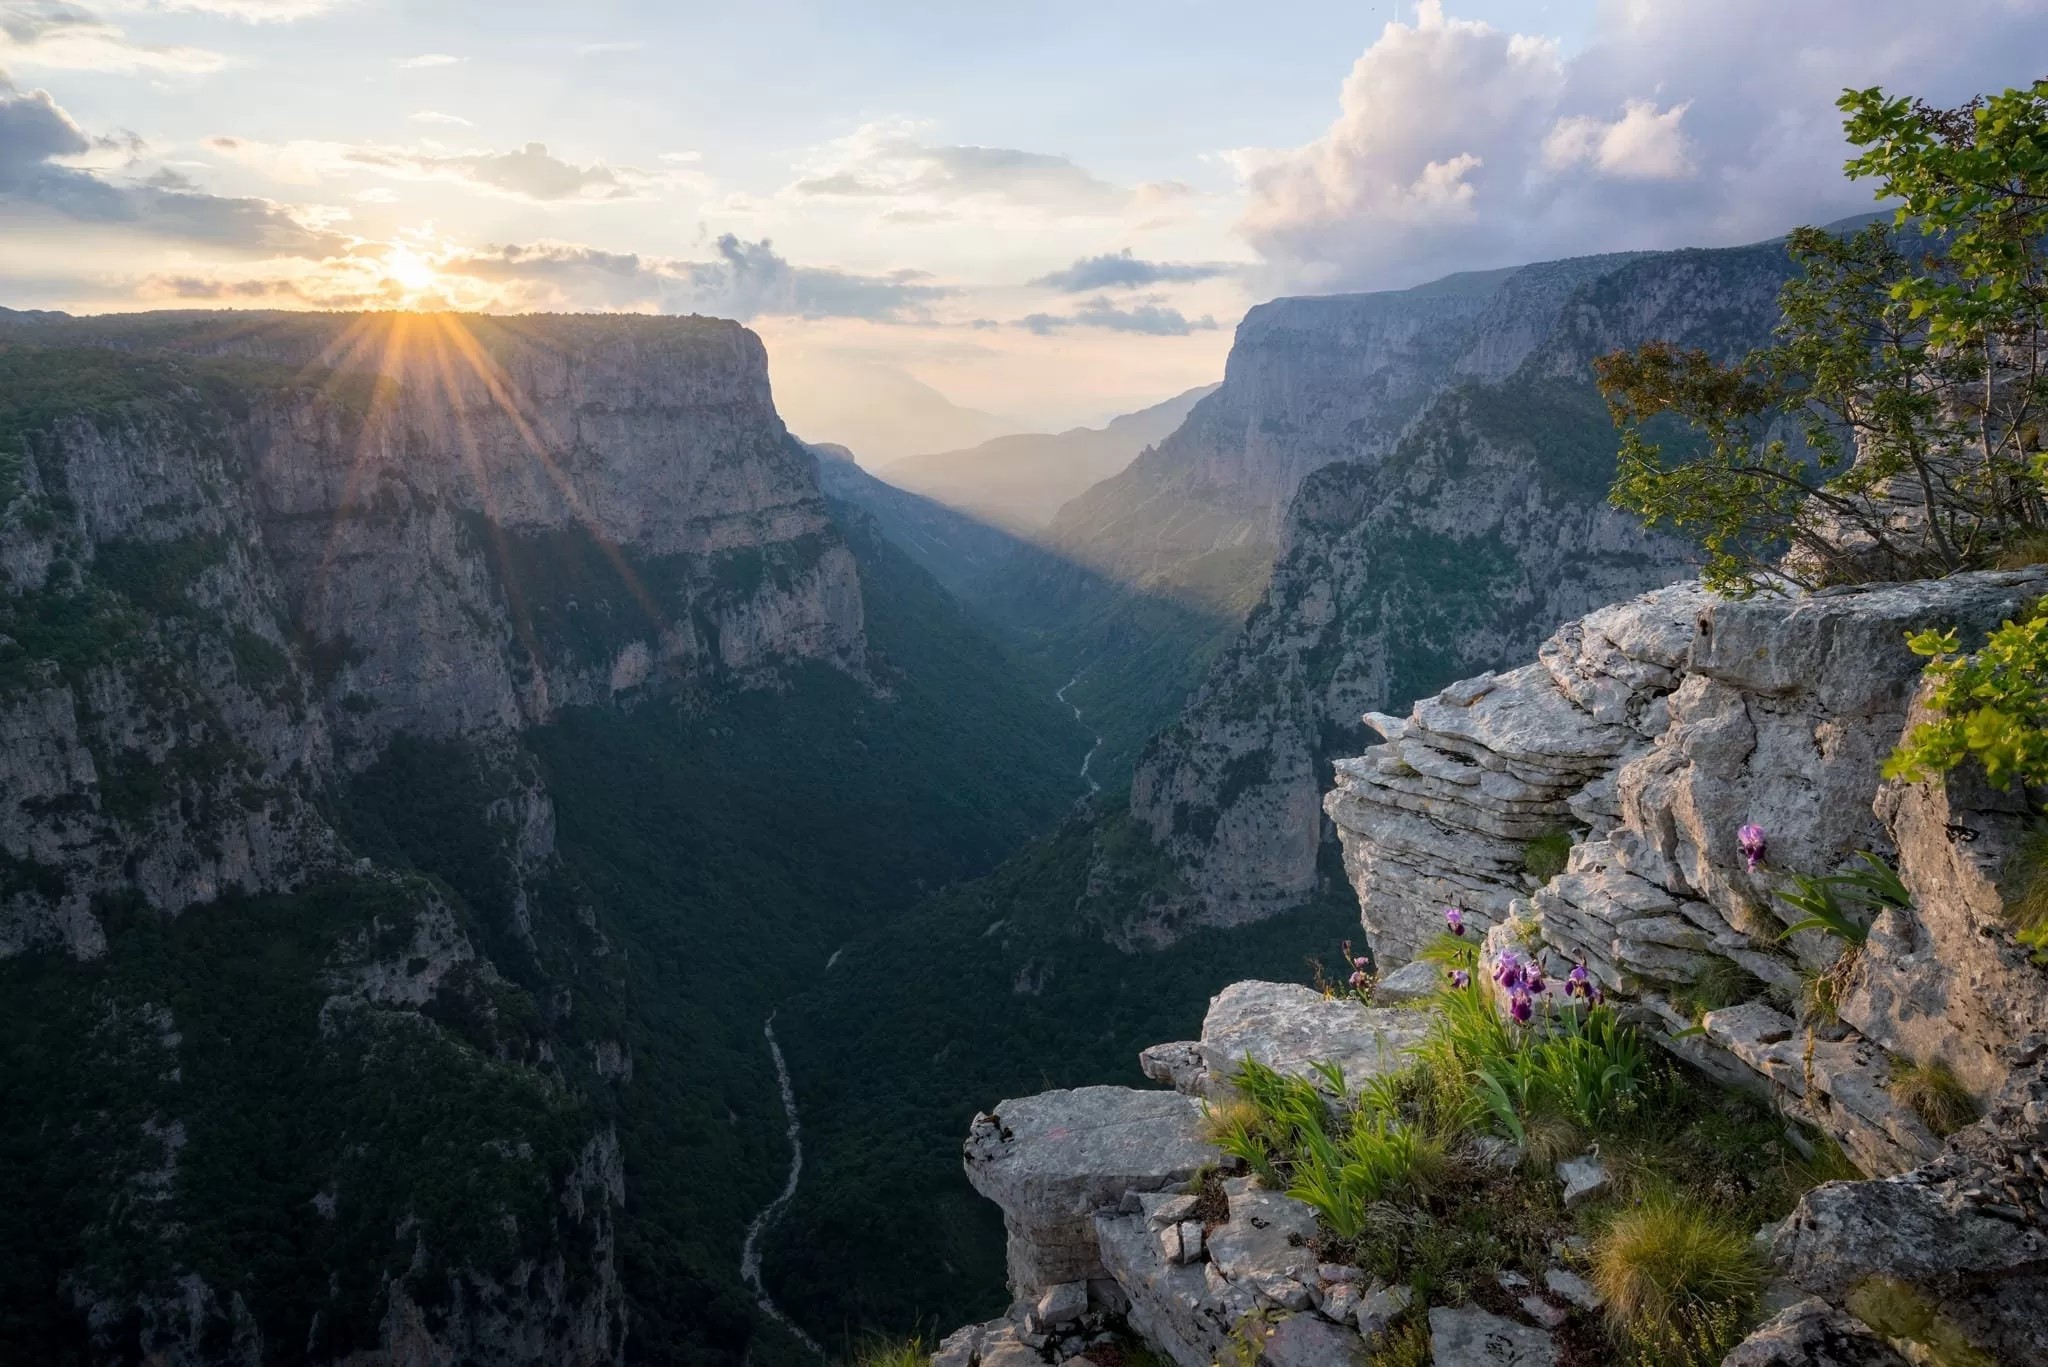 Vikos Gorge: A Breathtaking Natural Wonder in the Heart of Greece